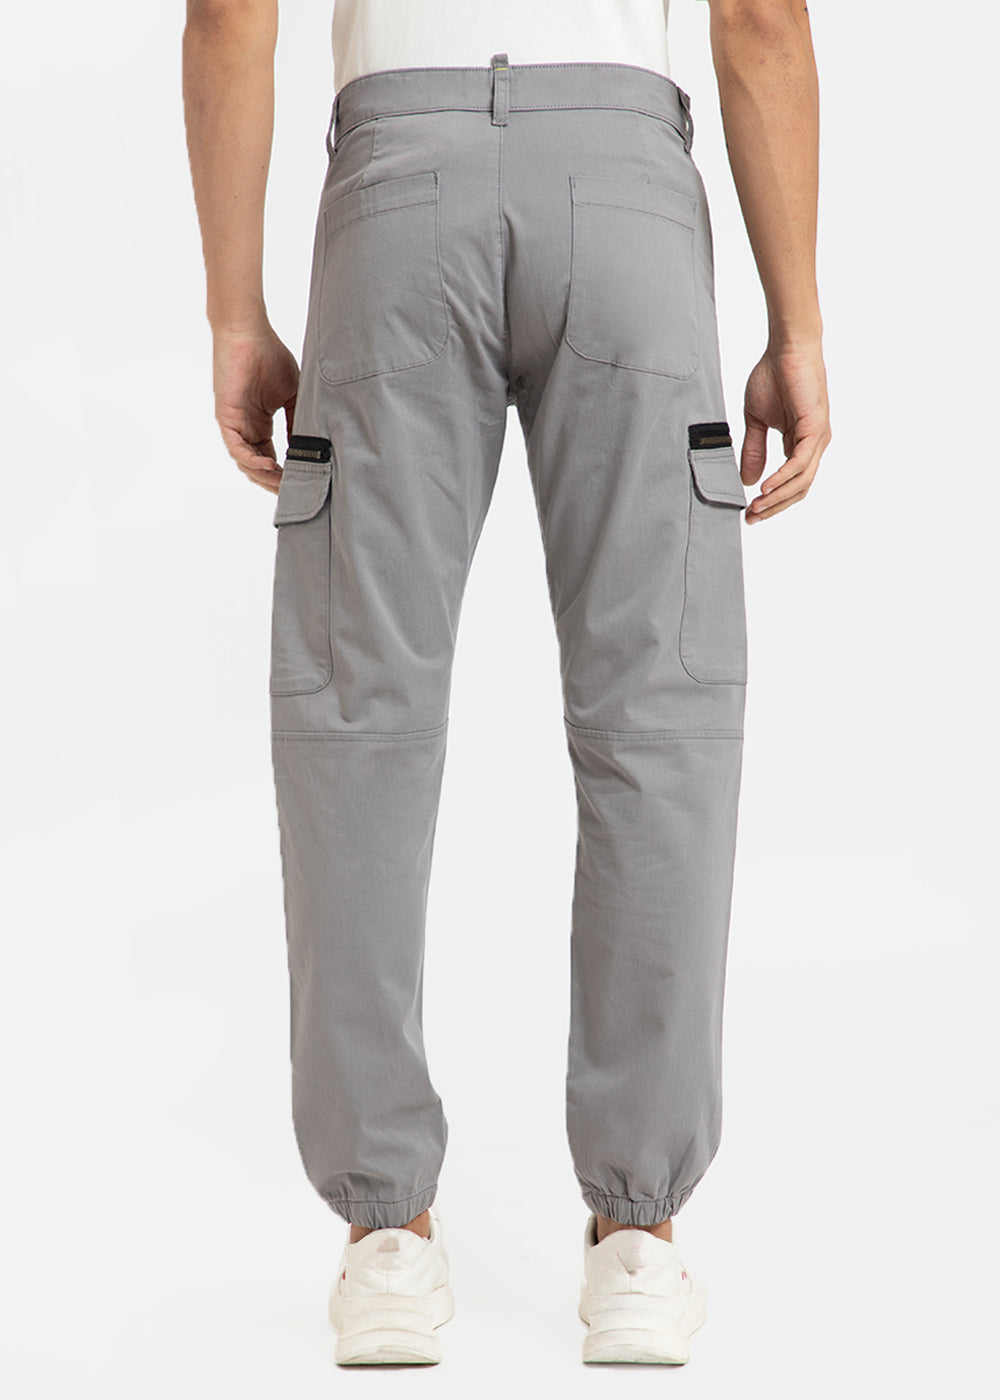 Pewter Gray Elasticated Cargo Pant